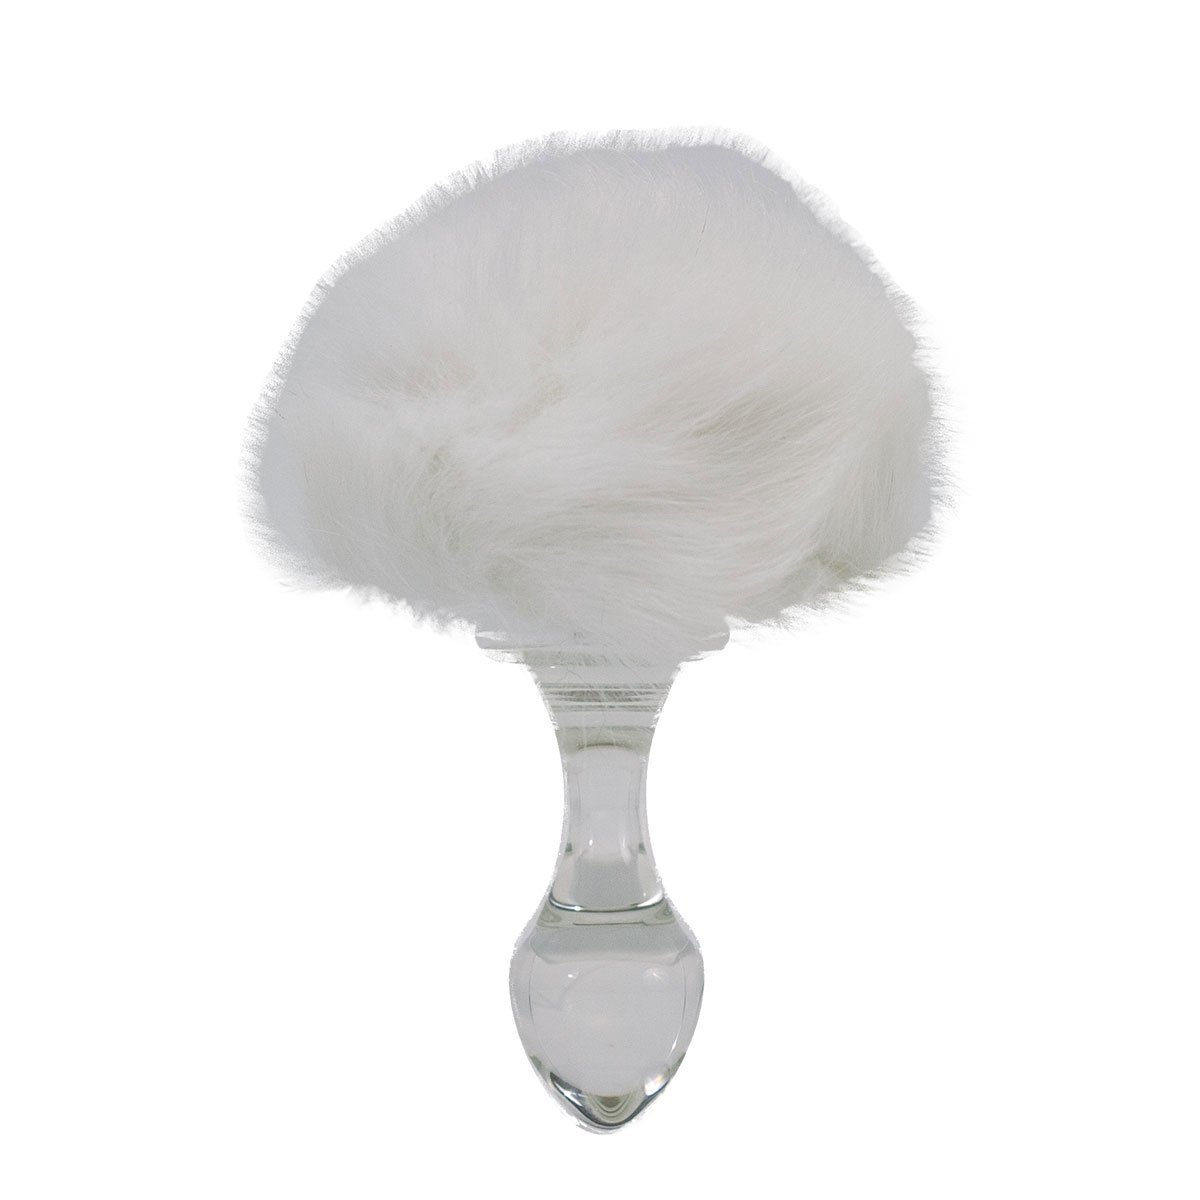 Crystal Delights Magnetic Bunny Tail - Buy At Luxury Toy X - Free 3-Day Shipping